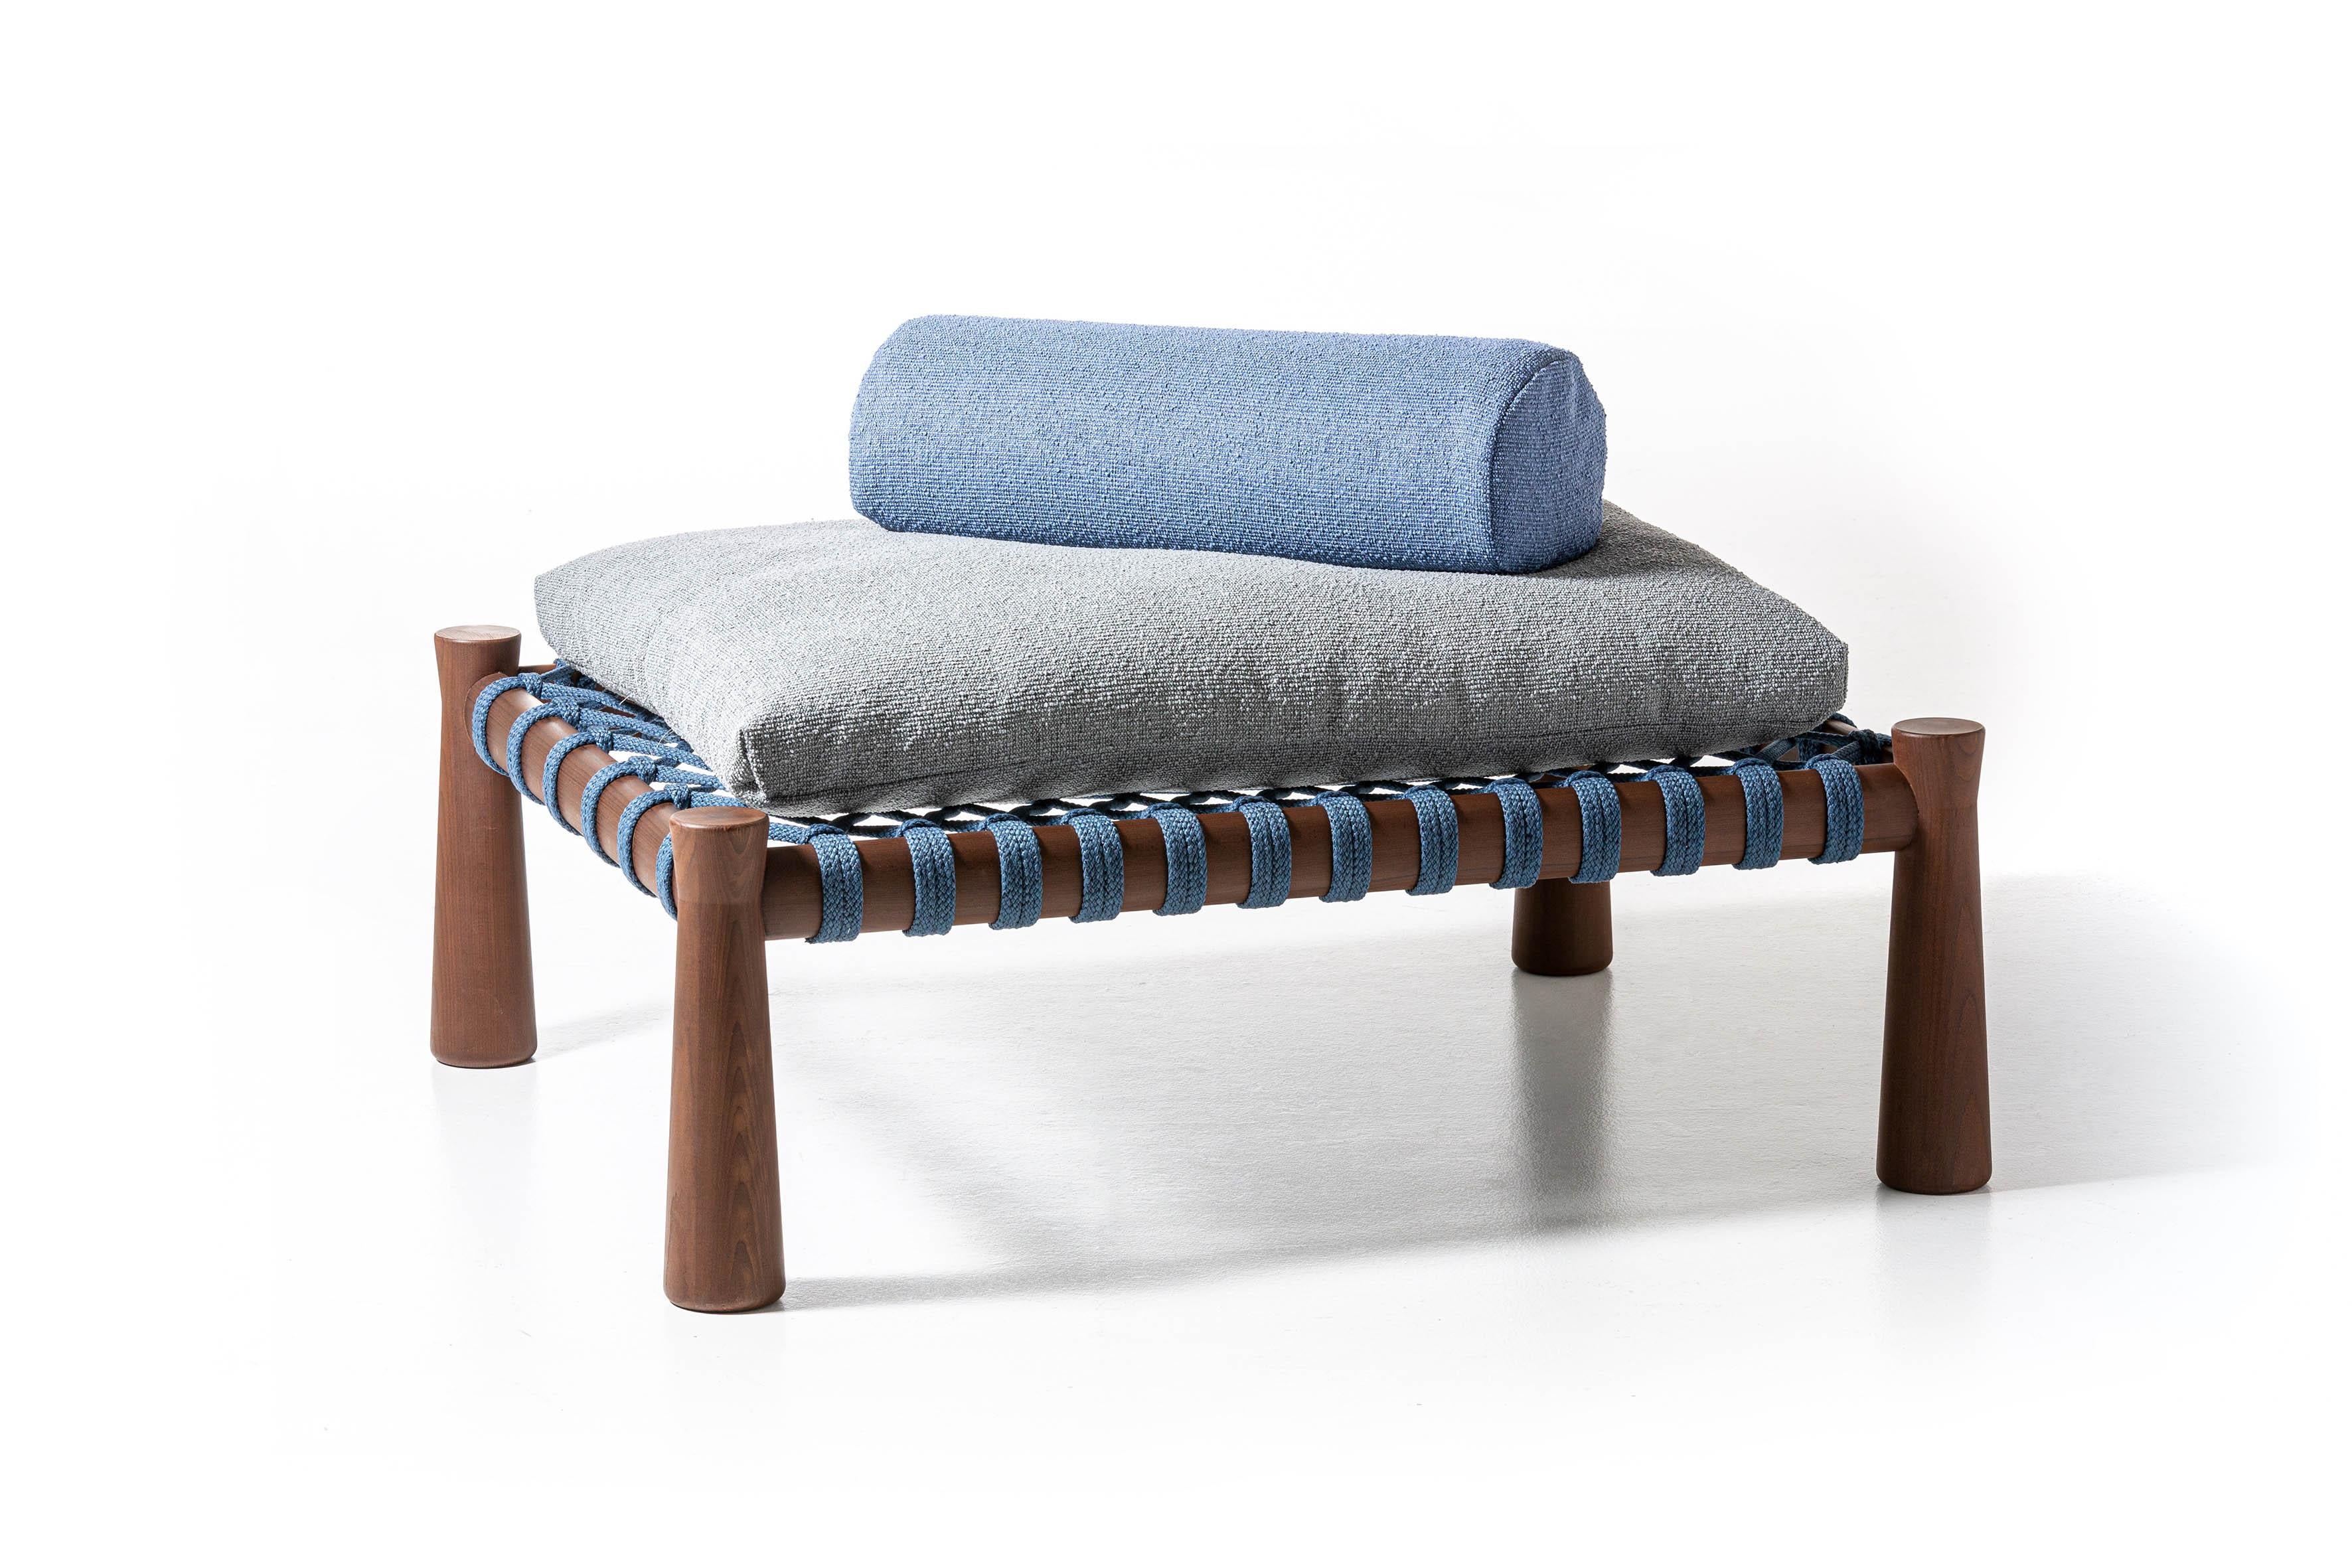 A traditional Indian bed that is low and spacious, the charpoy is reinterpreted by Chiara Andreatti through the use of nautical ropes in natural, red and blue, woven by hand to the structure in Iroko wood treated for outdoor use, characterised by